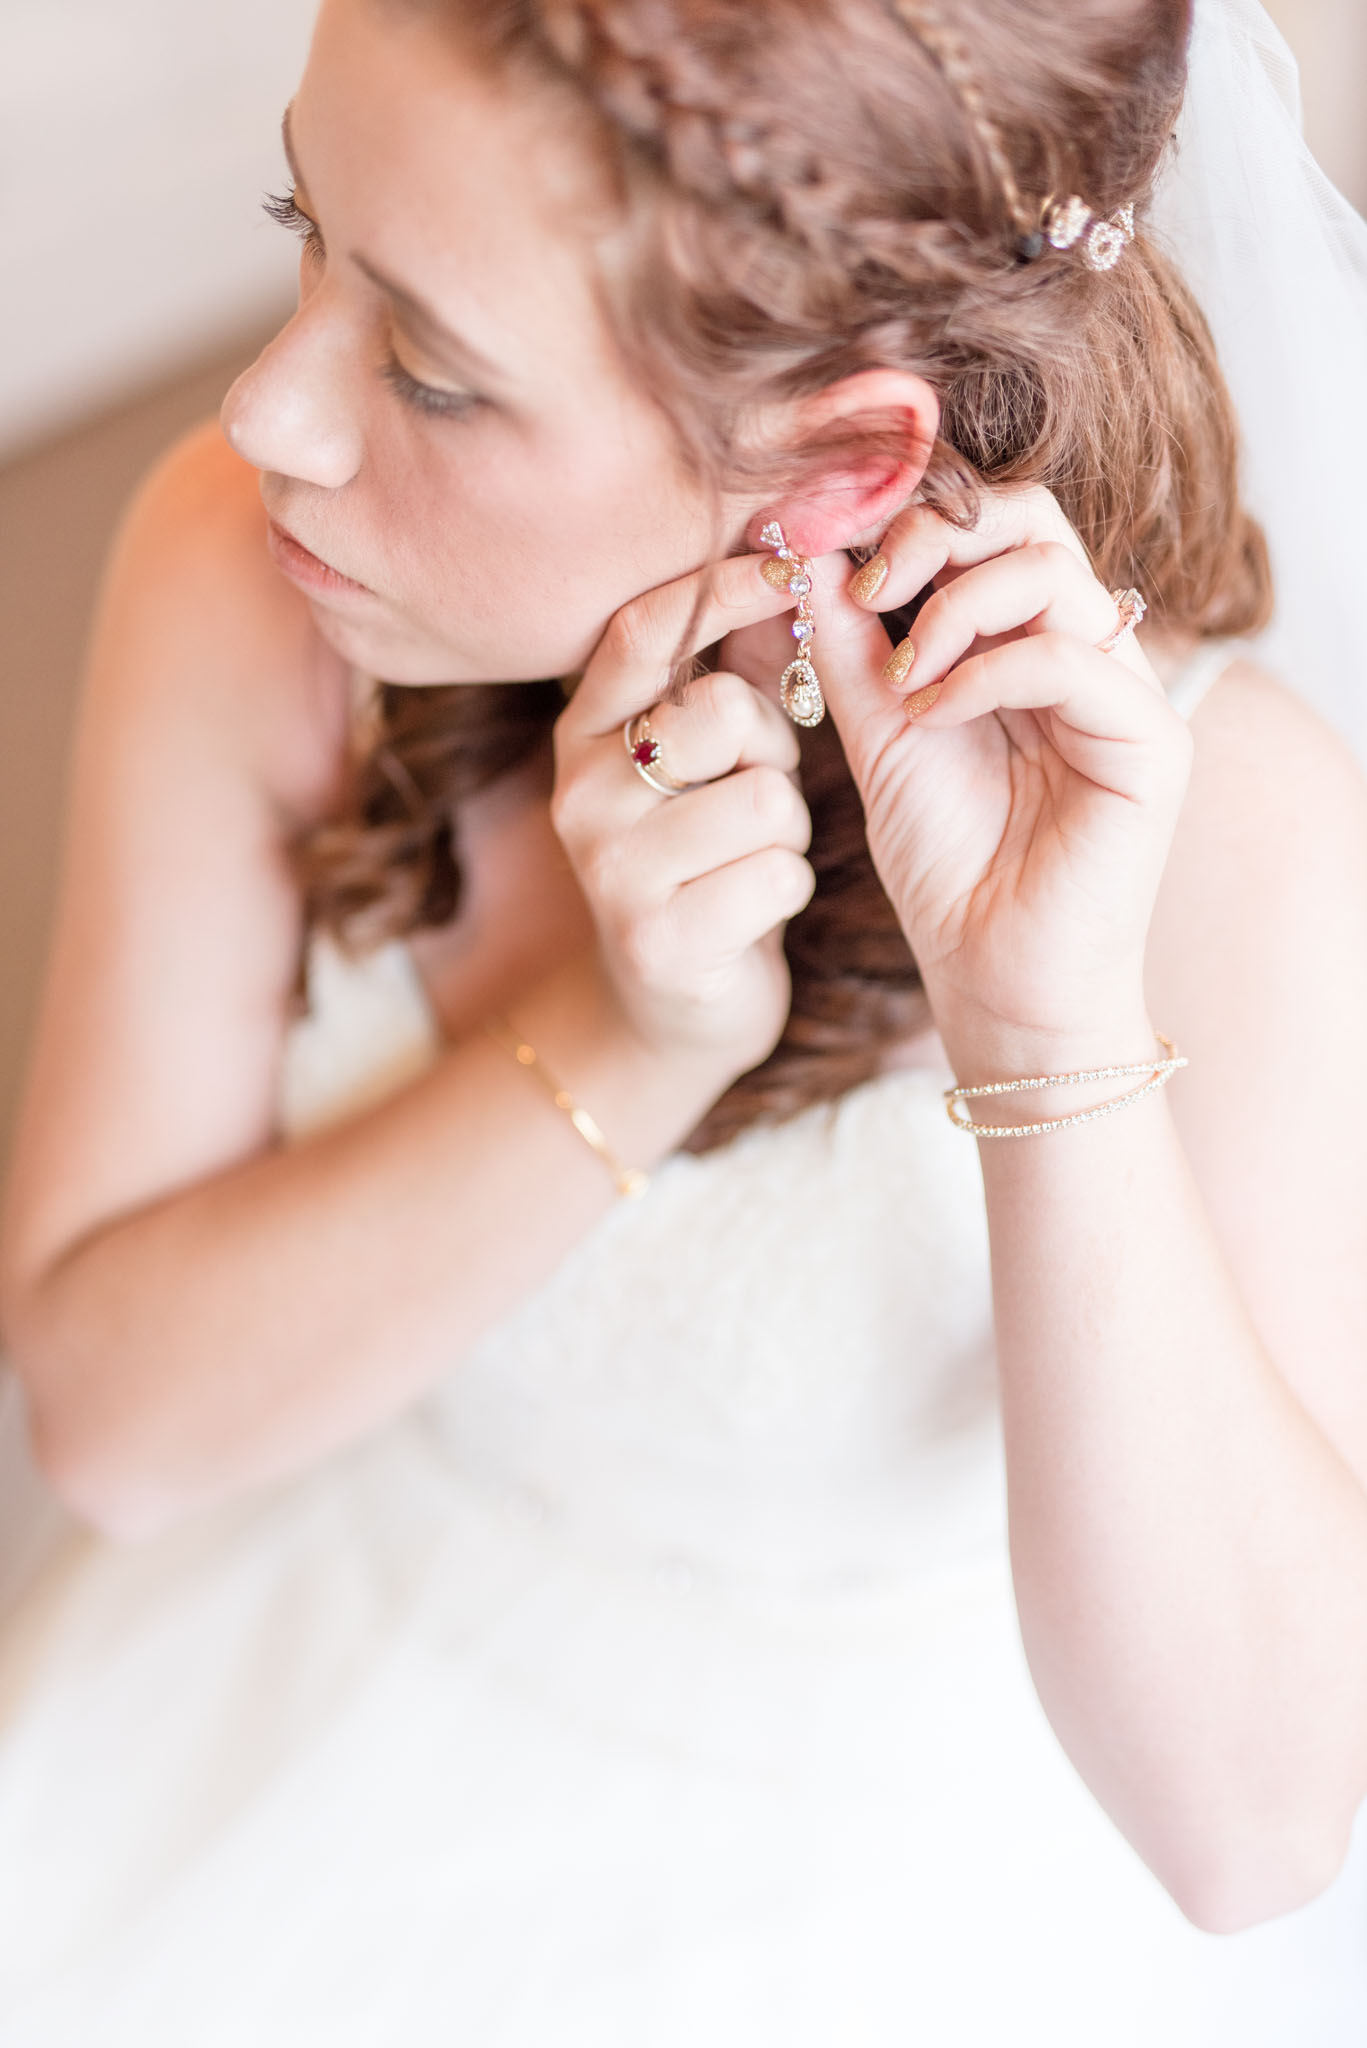 Bride puts on her earrings on her wedding day.